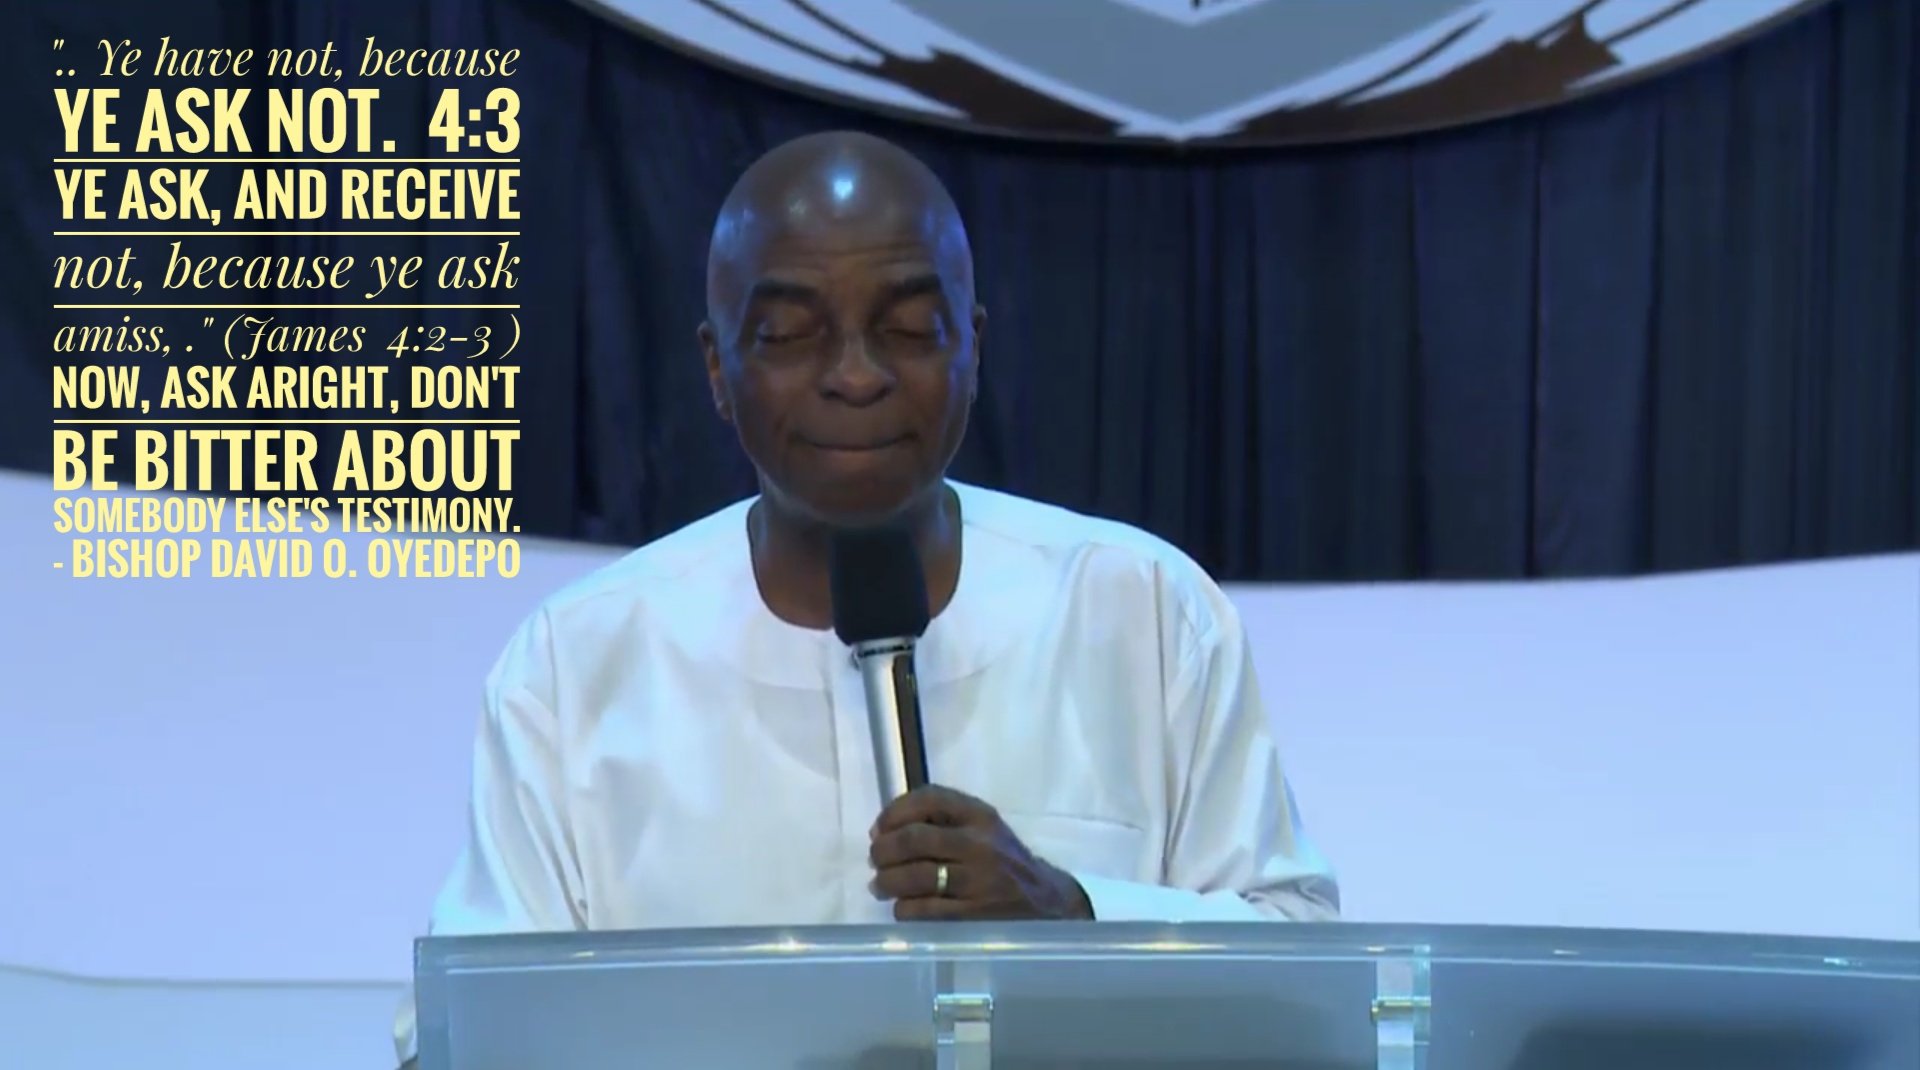 Faith Abiola Oyedepo on X: Testimony Time: Healed Via The Anointing Oil! I  decree you will have a testimony to share before this week is over in the  name of Jesus! #Healing #